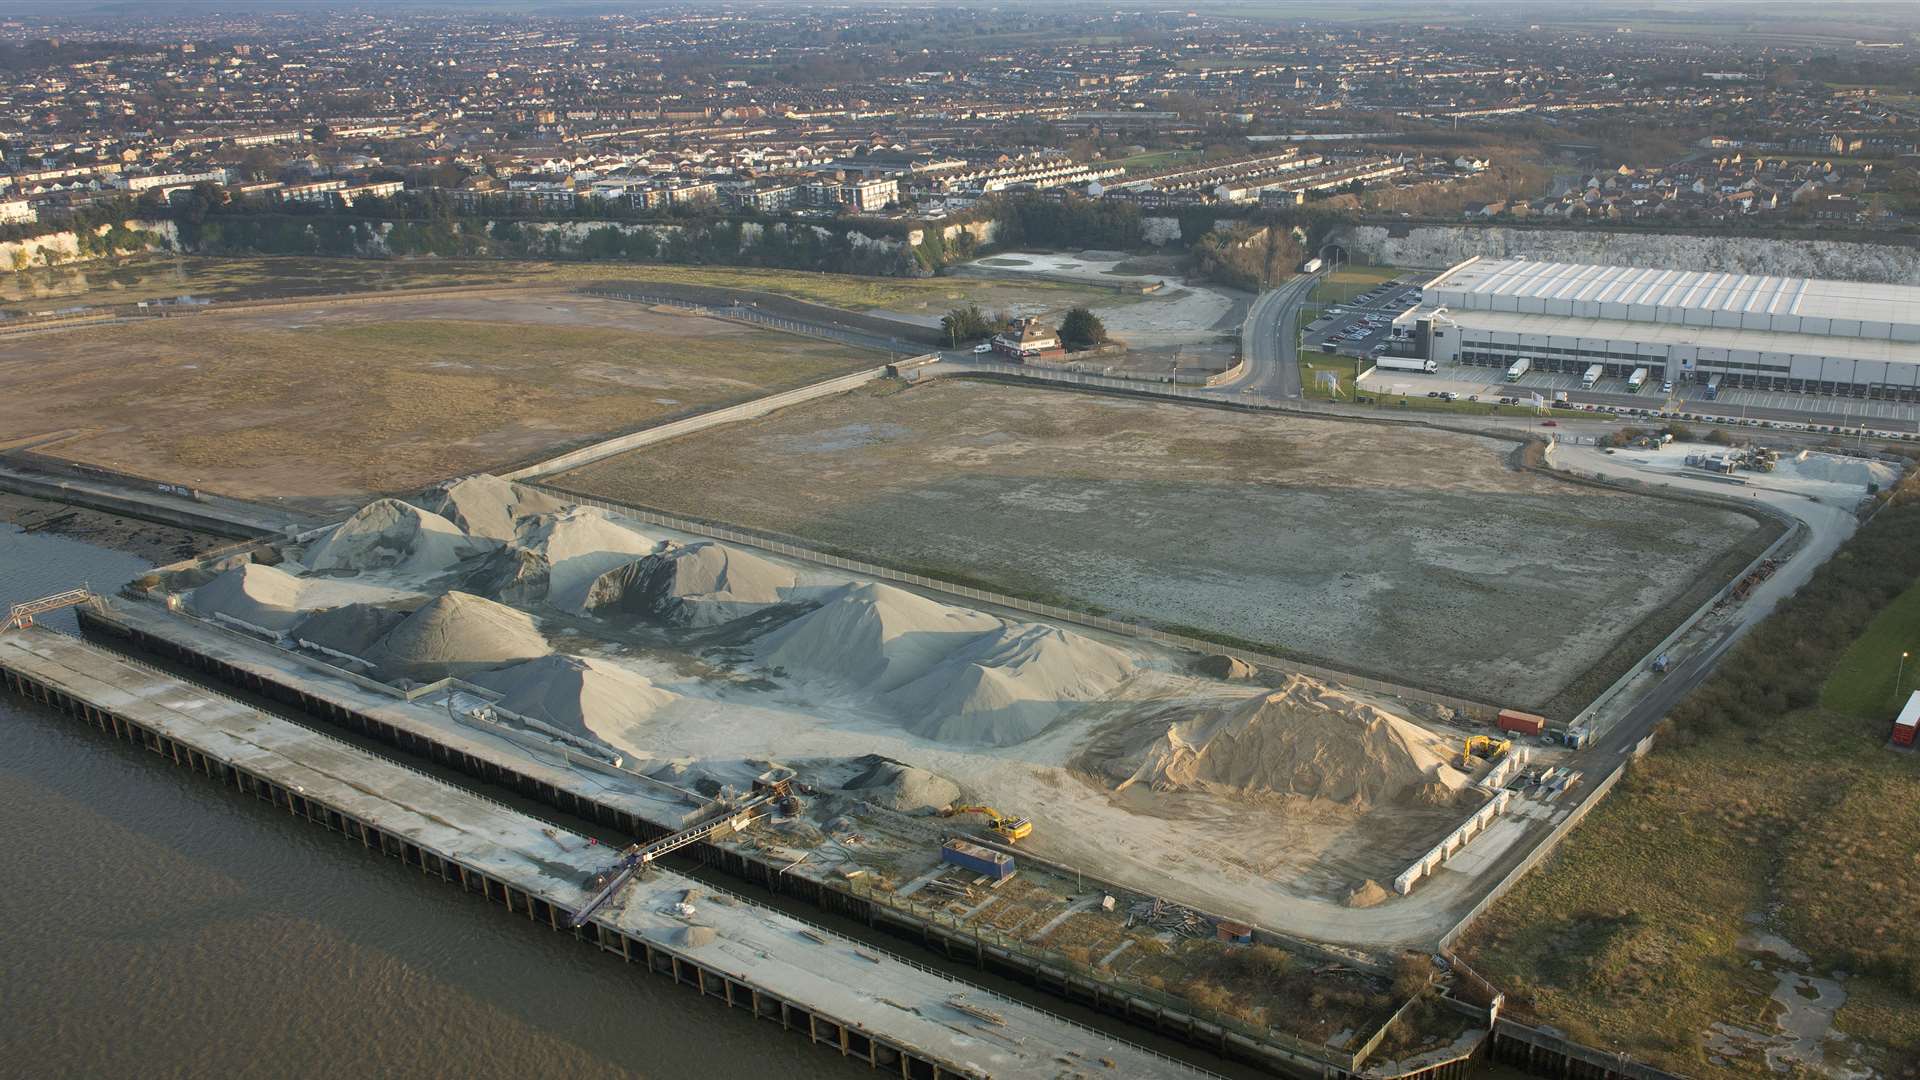 Ebbsfleet Development Corporation has approved plans to build commercial space at Northfleet Embankment East on the banks of the River Thames